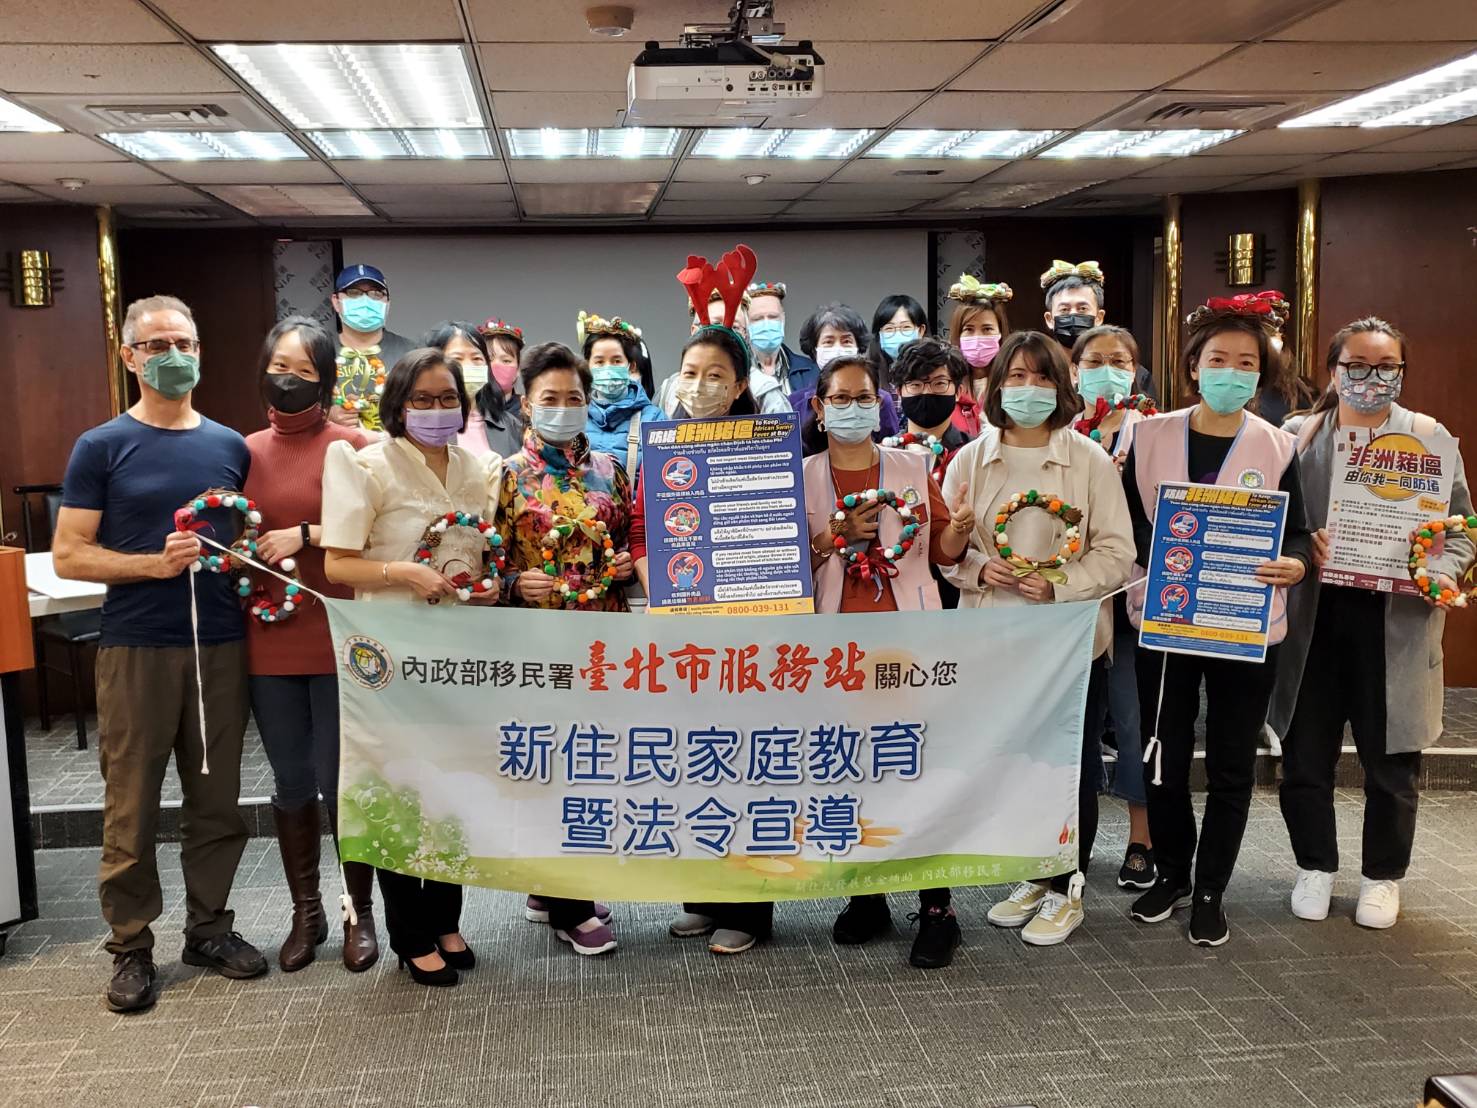 New Immigrants Interpreter Shares Festivals in Hometown; Four Months of Christmas Celebration in the PhilippinesPhoto provided by NIA Taipei City Service Center